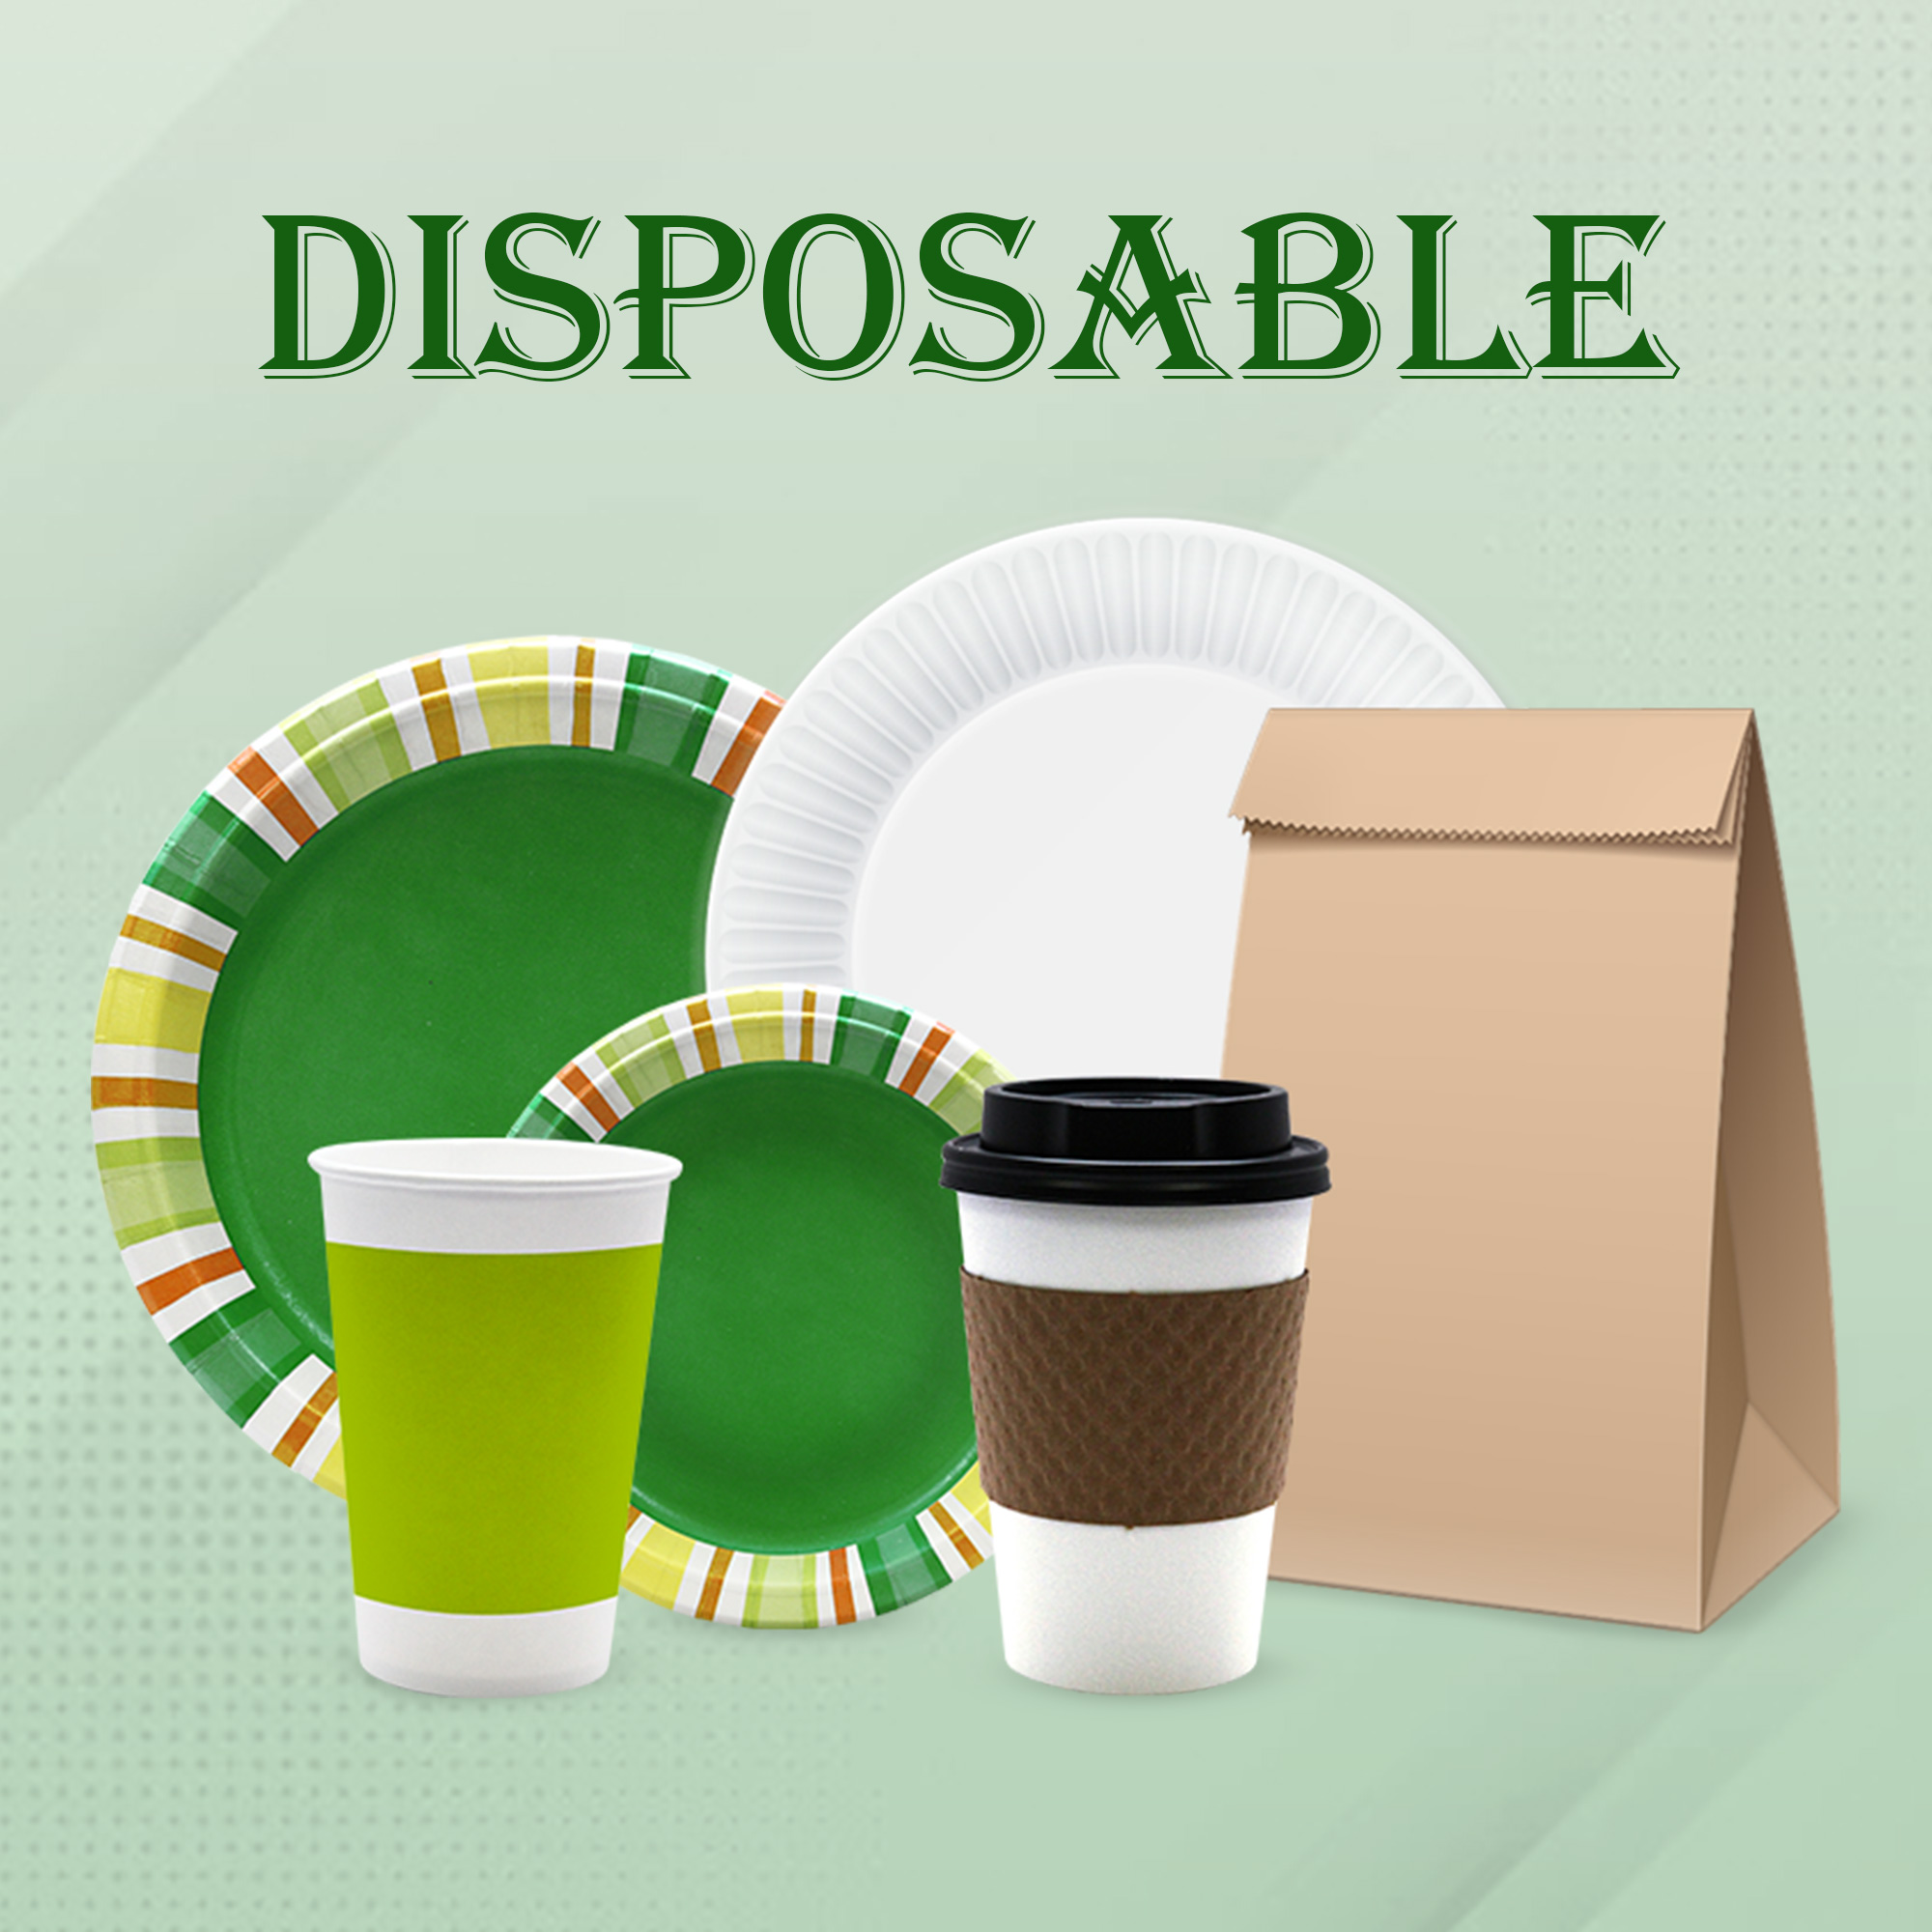 Disposable Items